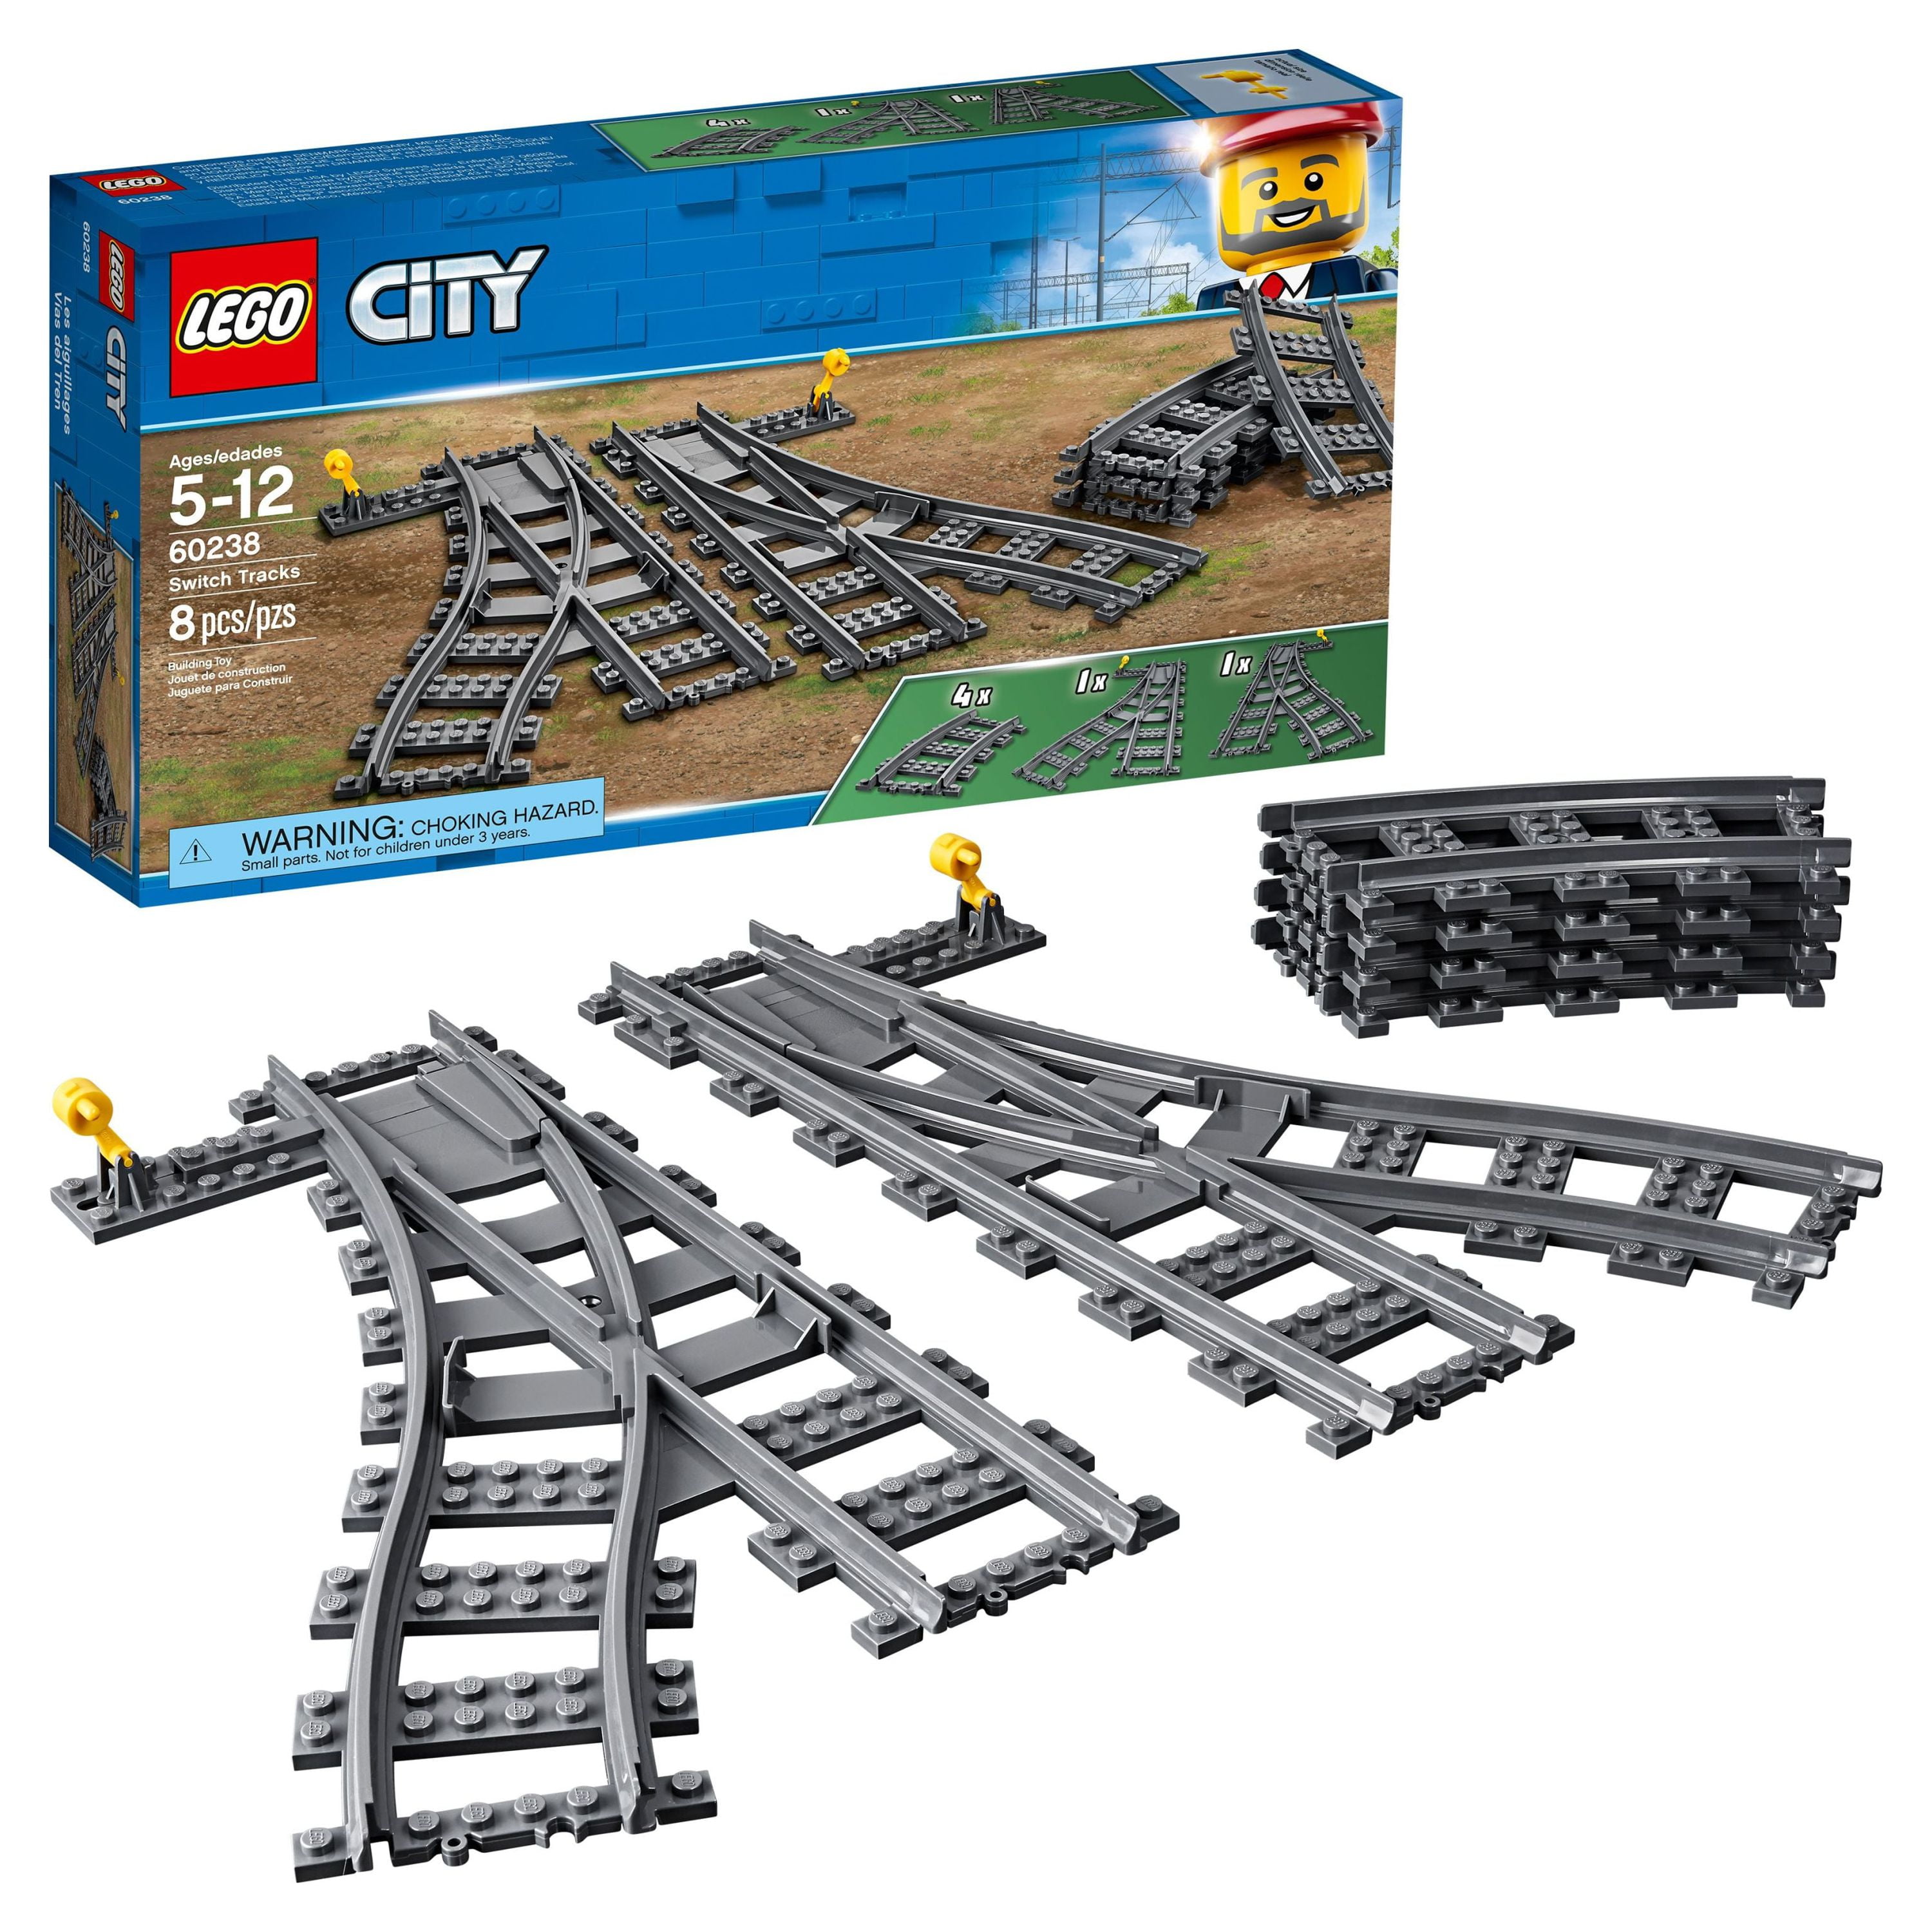 LEGO City Freight Train Set Remote Control Toy - Imagine That Toys